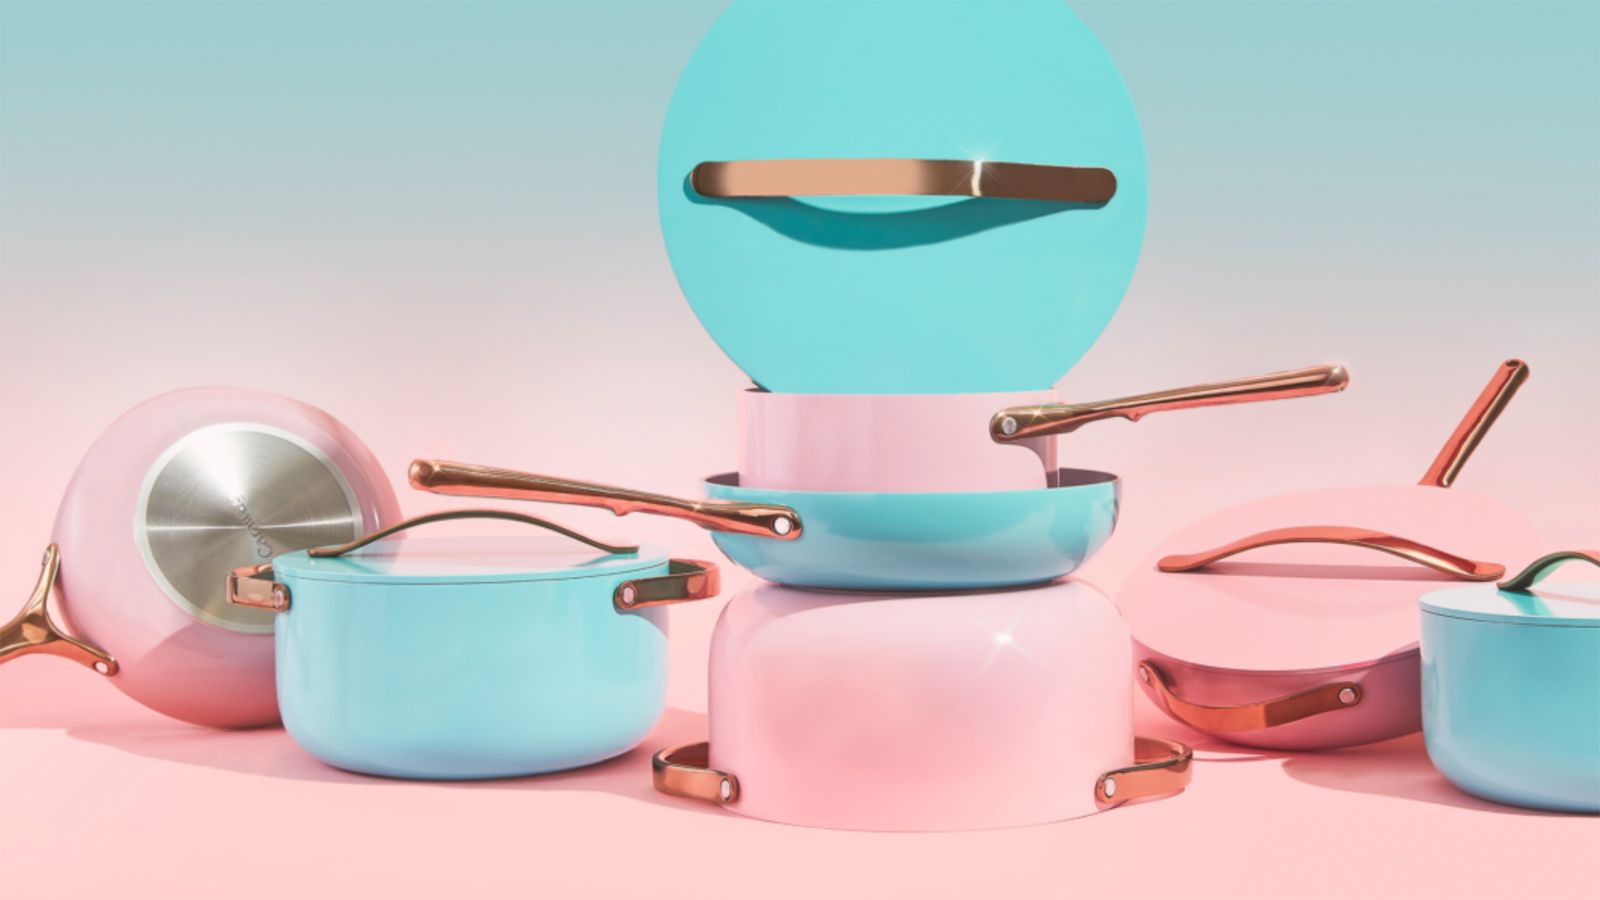 Caraway x Amber Vittoria: Pink and turquoise cookware